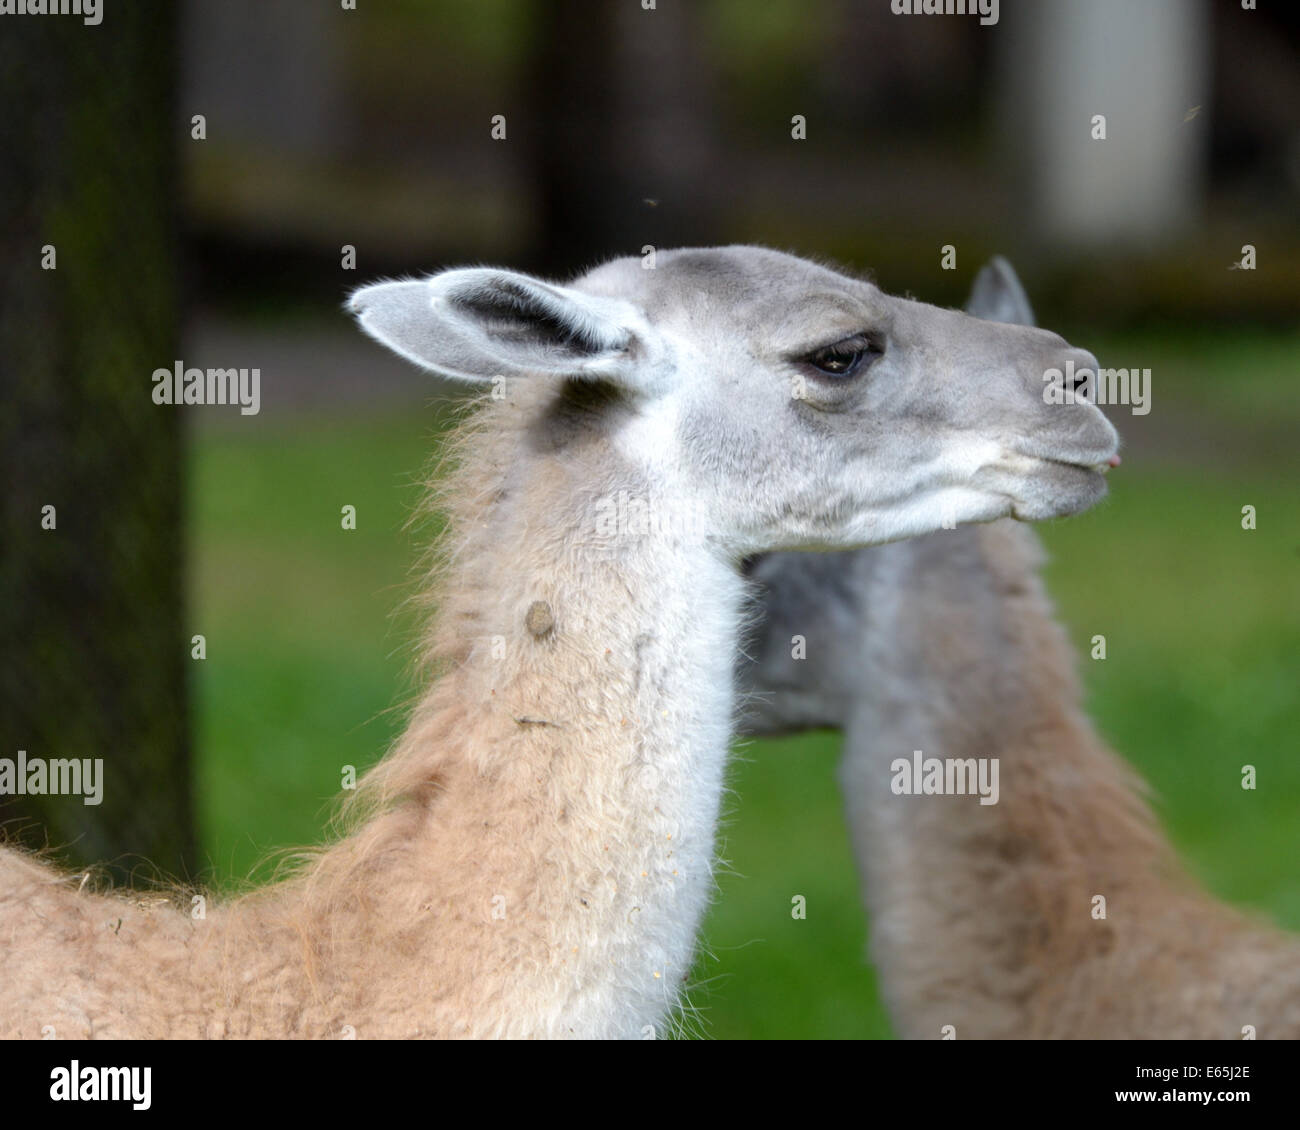 Guanaco (Lama guanicoe) is a camelid native to South America that stands between 1 and 1.2 metres. Stock Photo